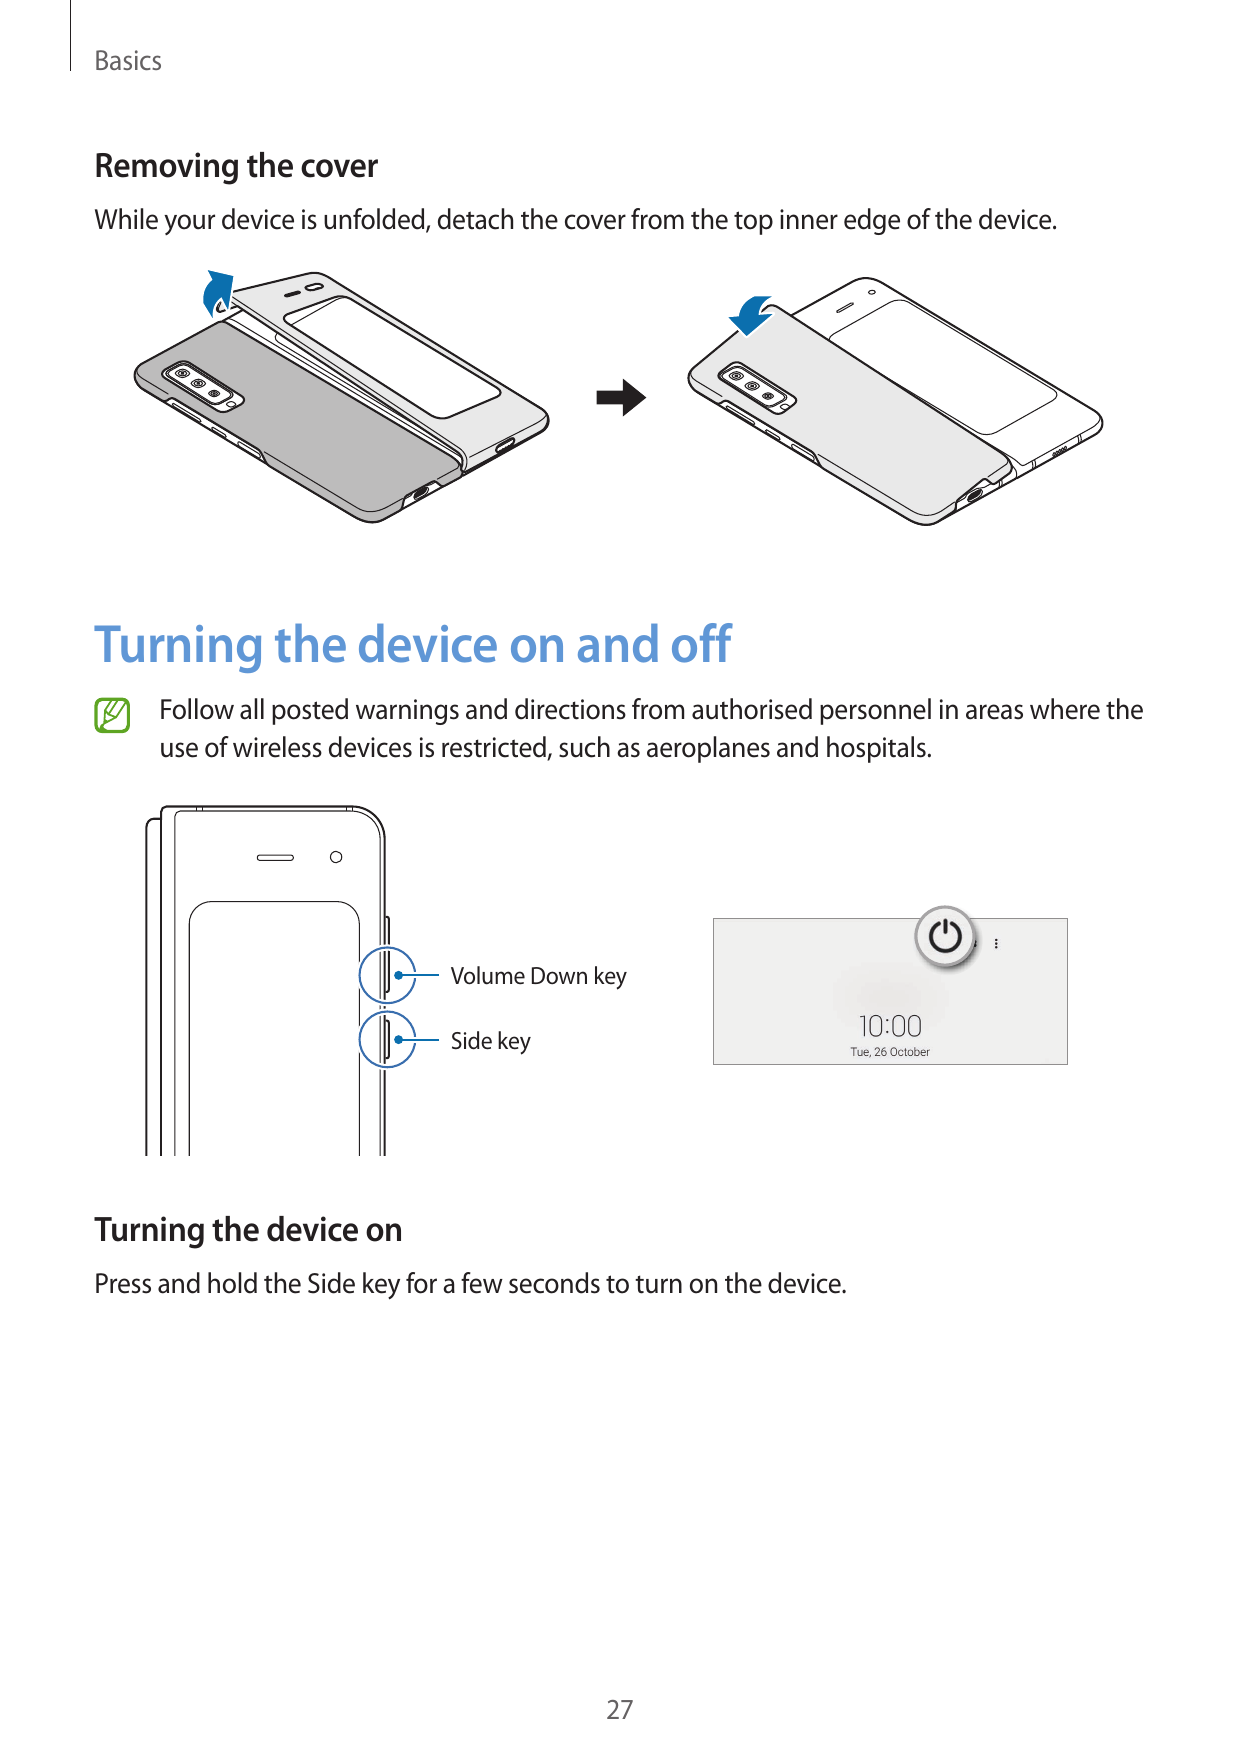 BasicsRemoving the coverWhile your device is unfolded, detach the cover from the top inner edge of the device.Turning the device